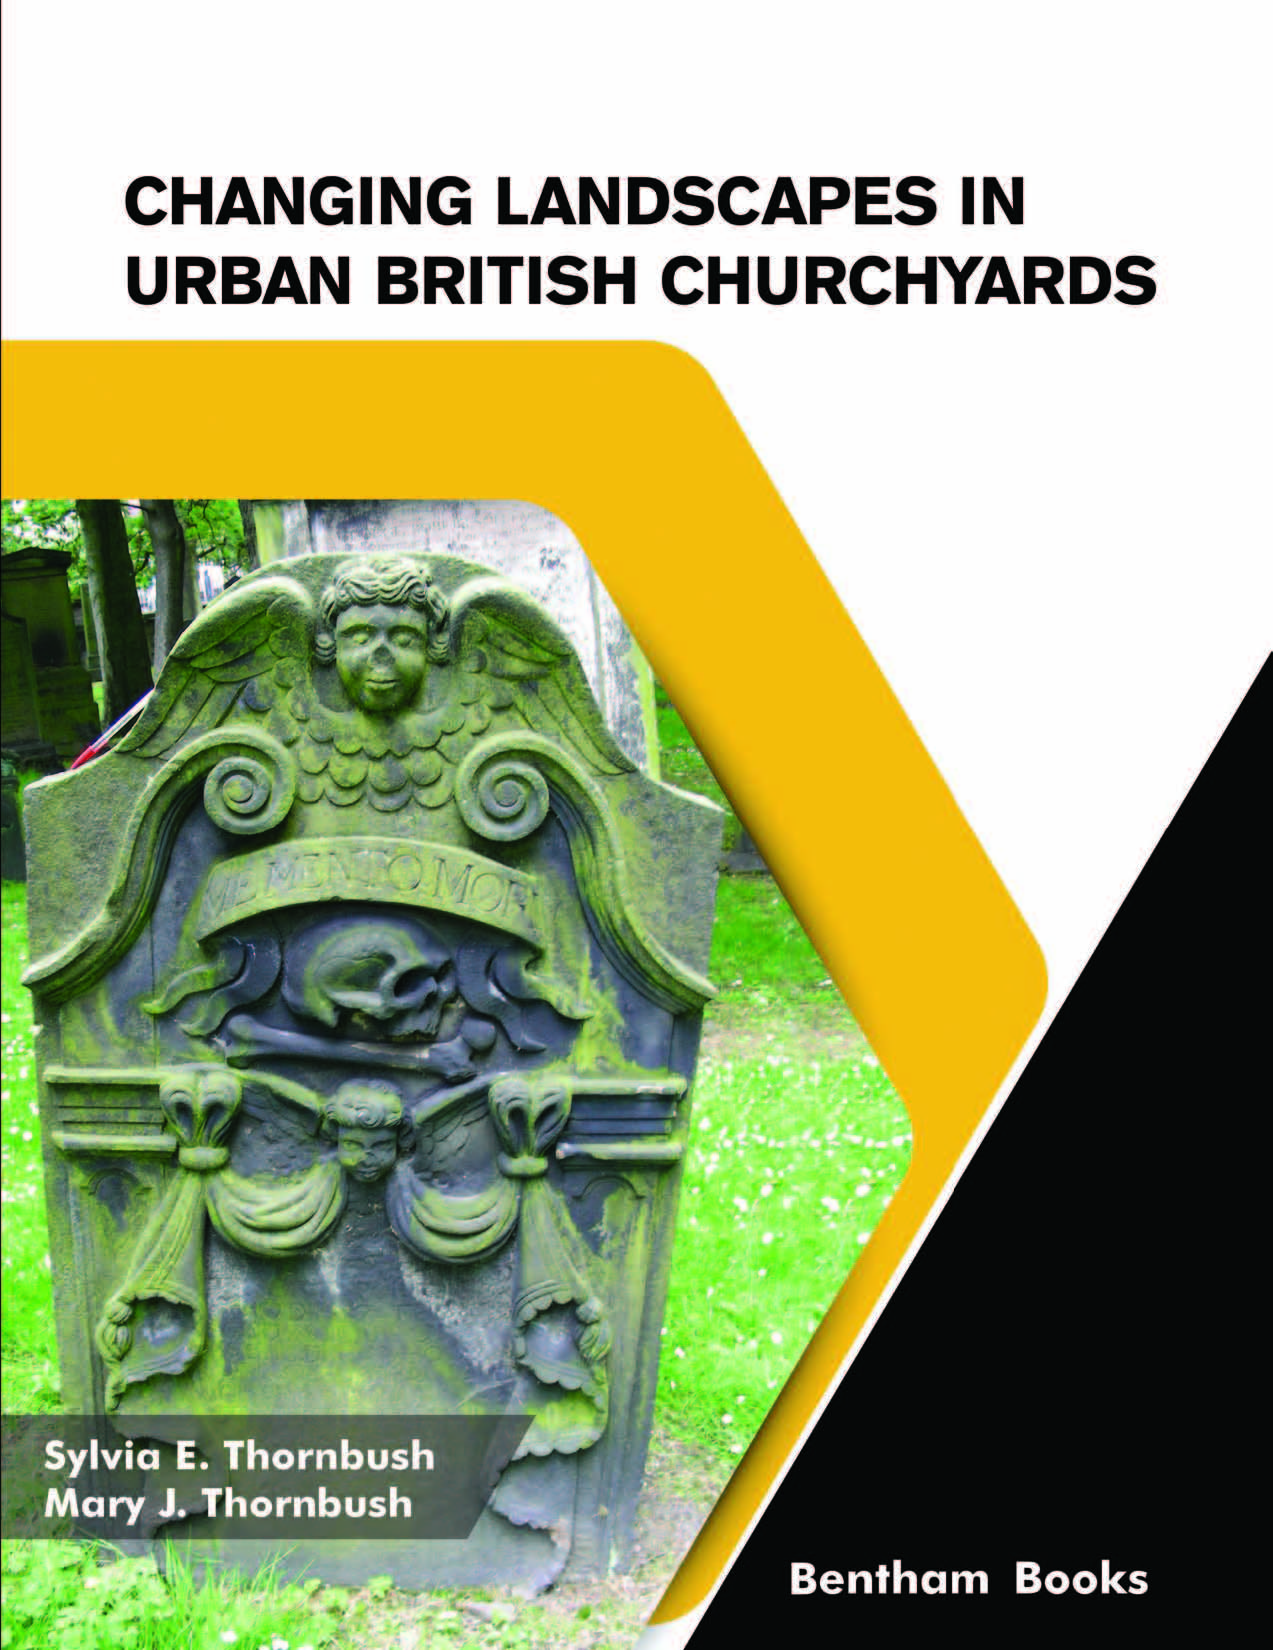 Changing Landscapes in Urban British Churchyards